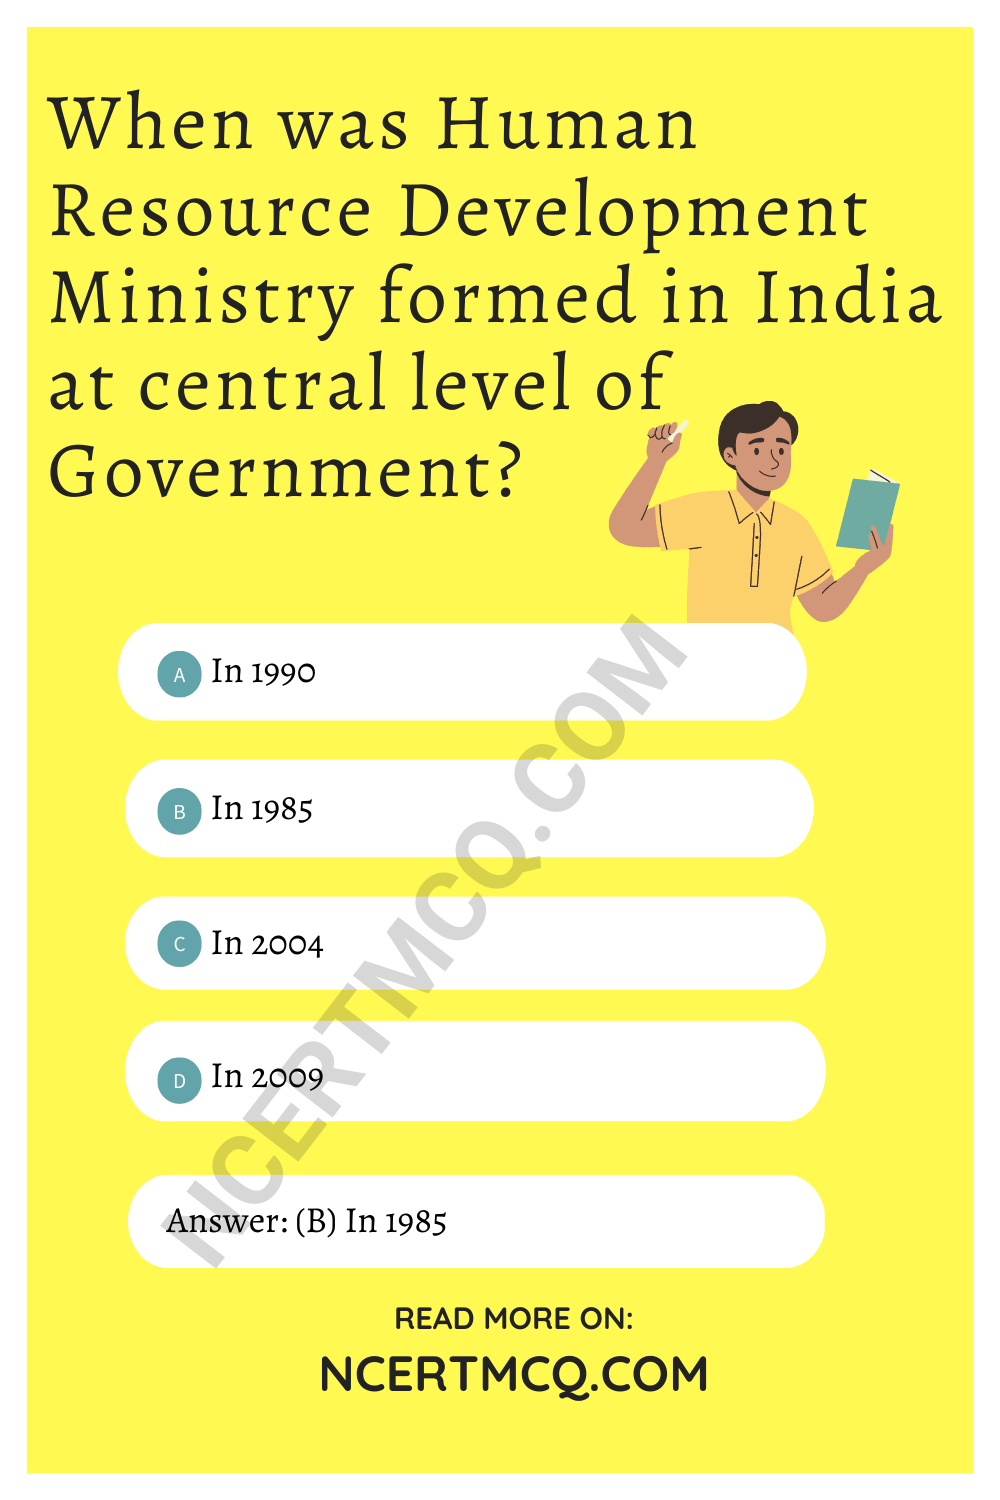 When was Human Resource Development Ministry formed in India at central level of Government?